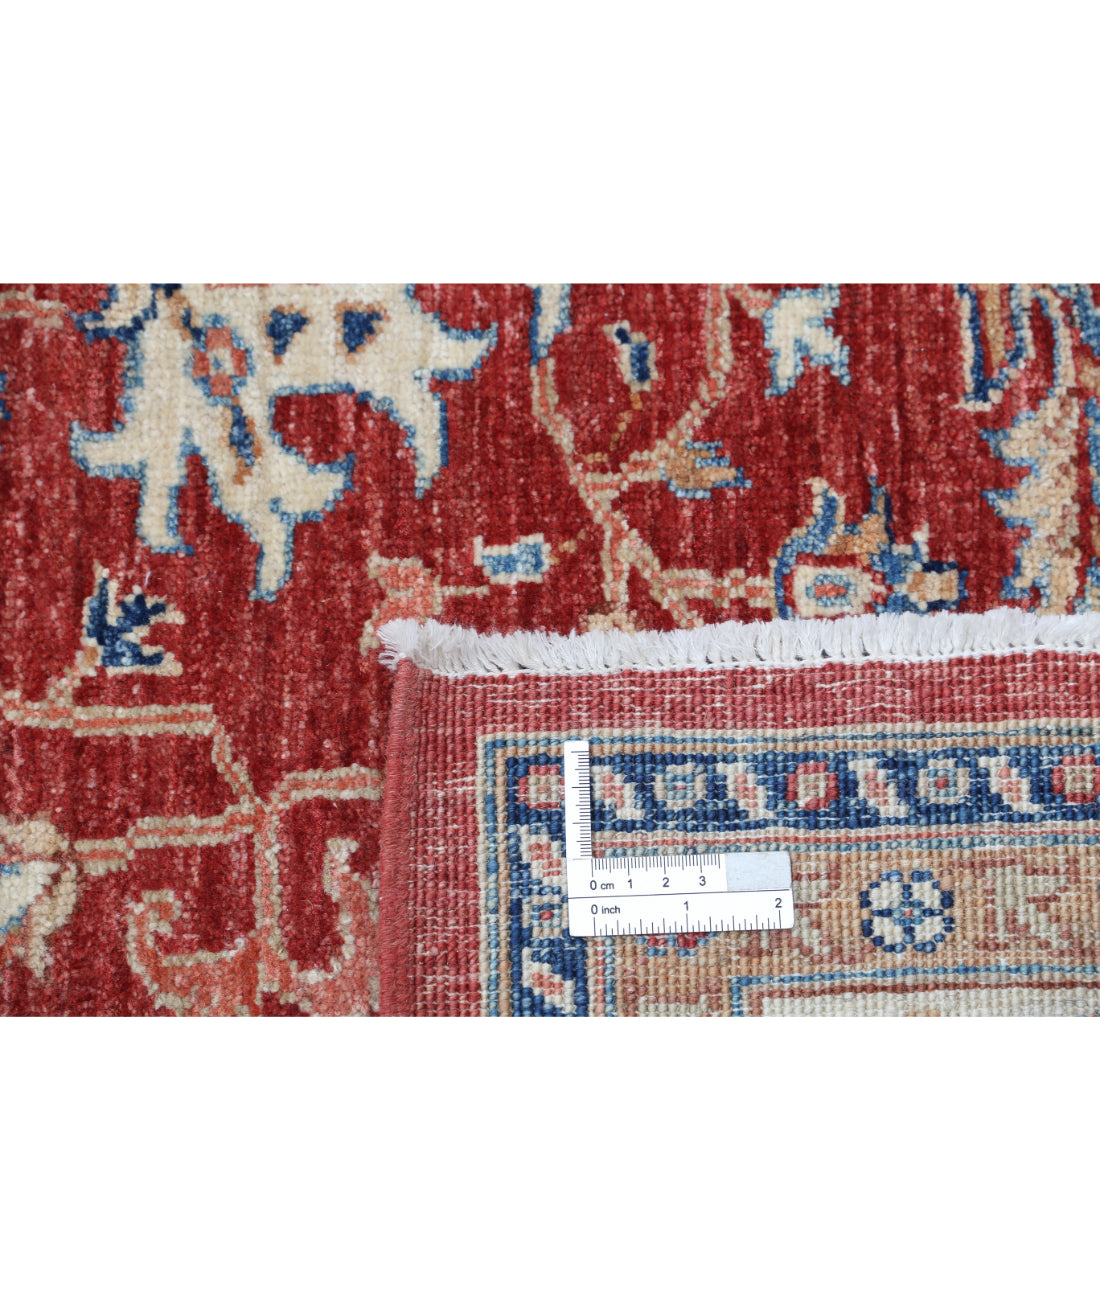 Hand Knotted Ziegler Farhan Wool Rug - 5'8'' x 7'9'' 5'8'' x 7'9'' (170 X 233) / Red / Ivory